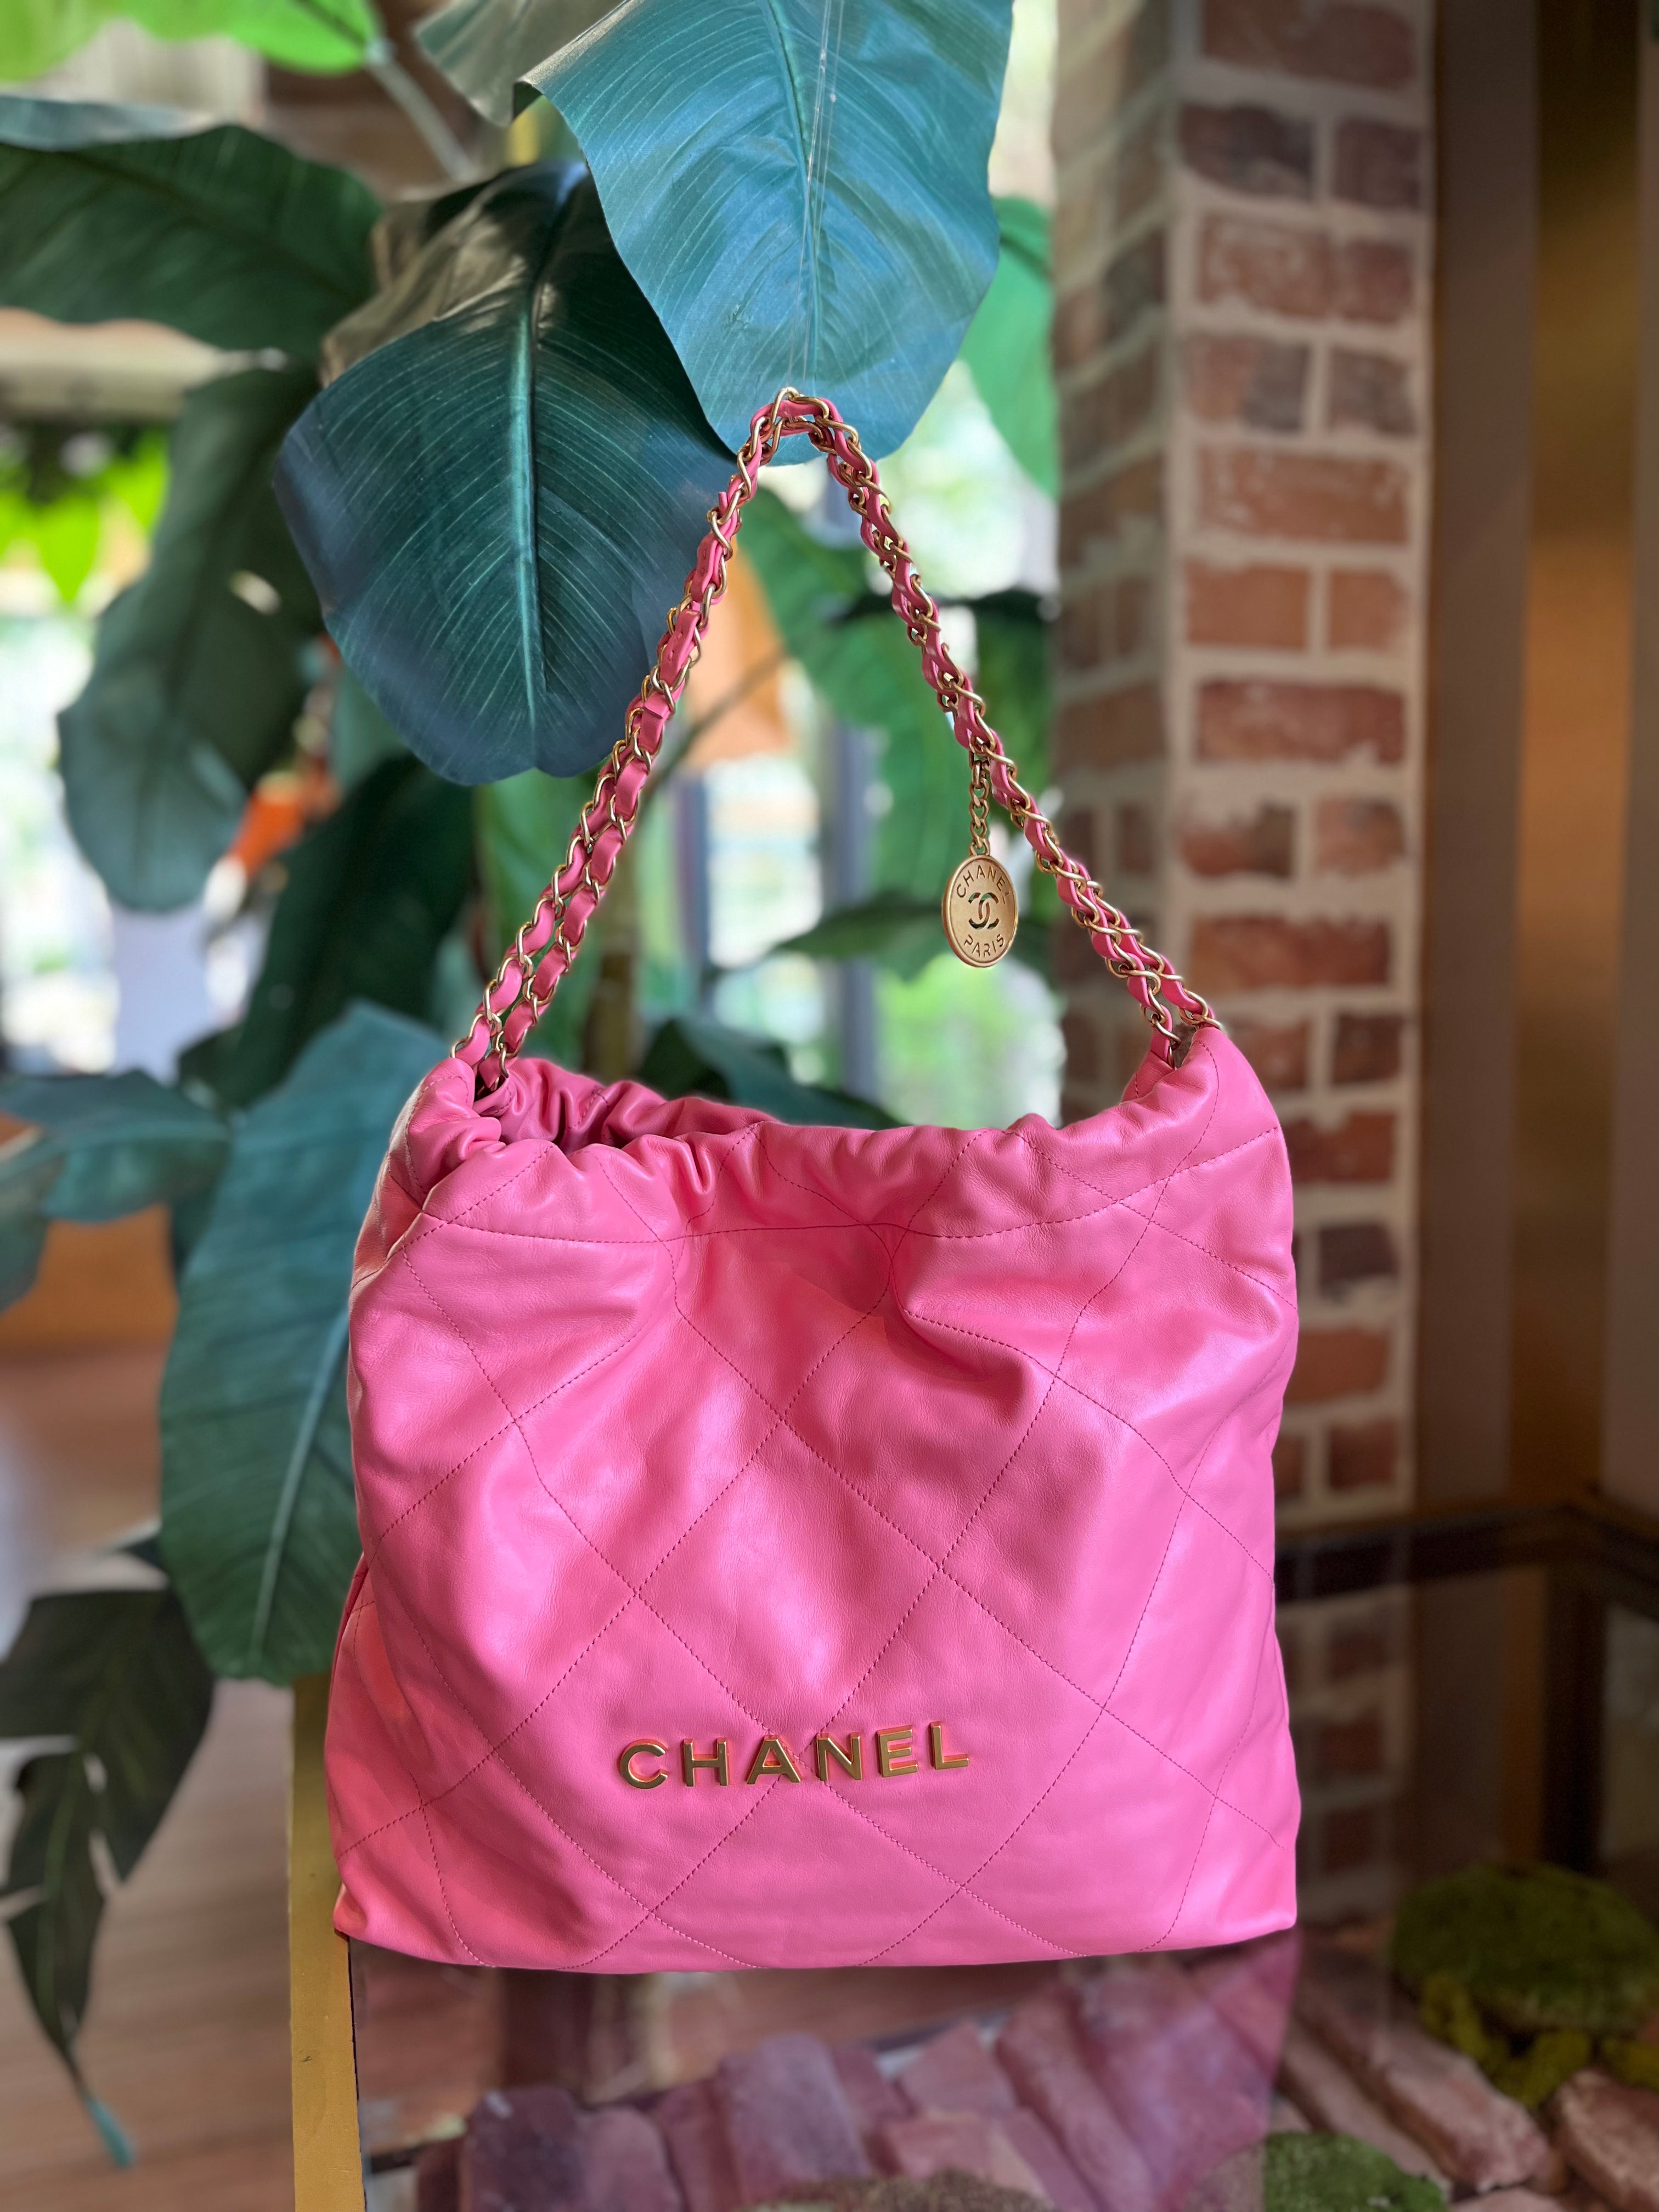 Chanel Chanel Cambon Neon Pink & Black Quilted Calfskin Leather Tote